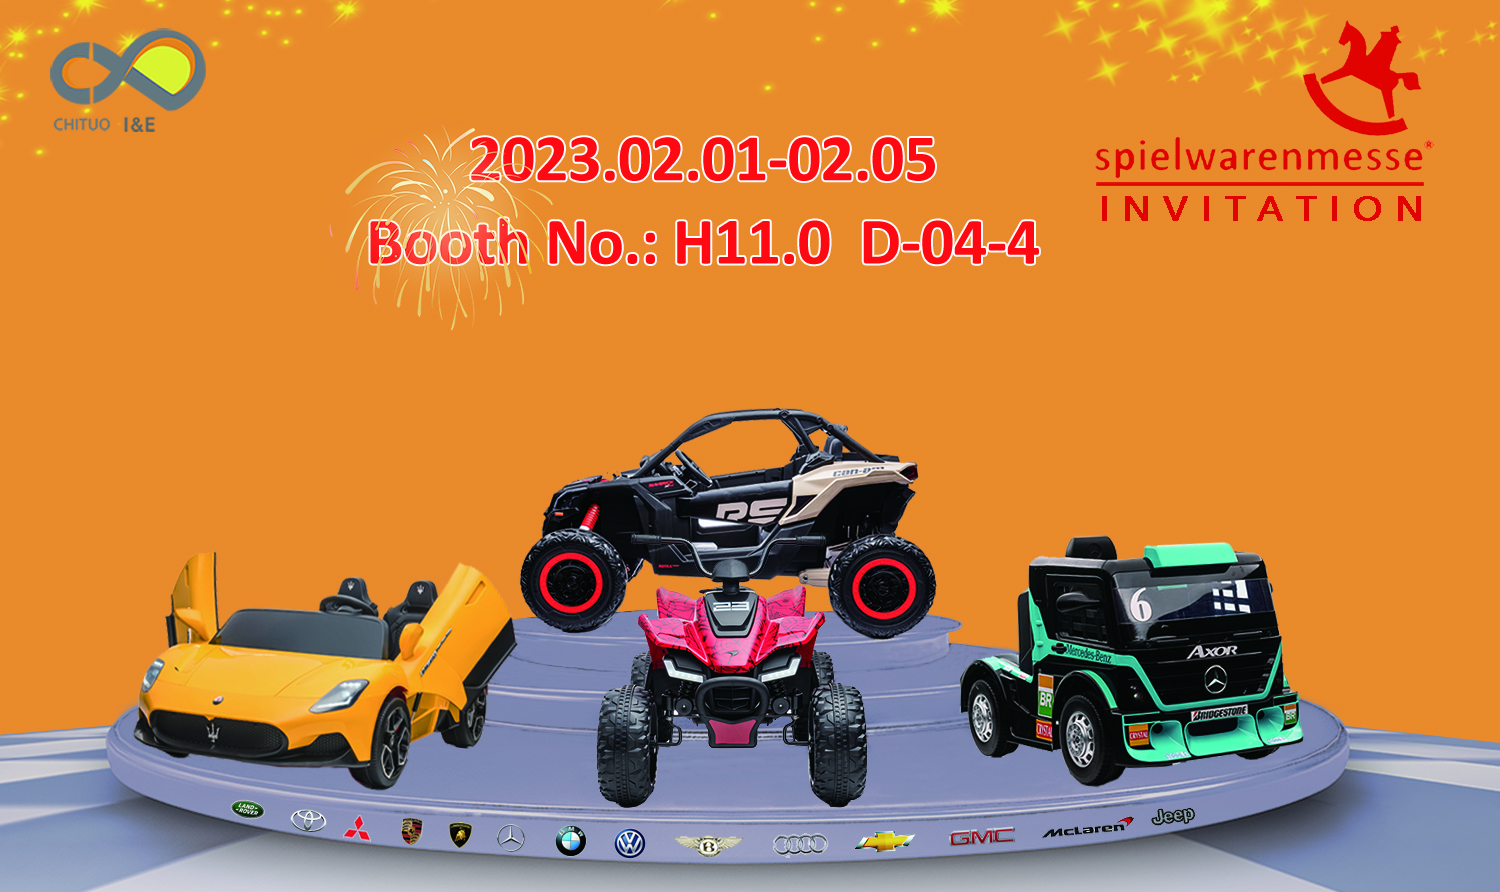 Xiamen Chituo will Attend the 2023 Spielwarenmesse Toys Fair